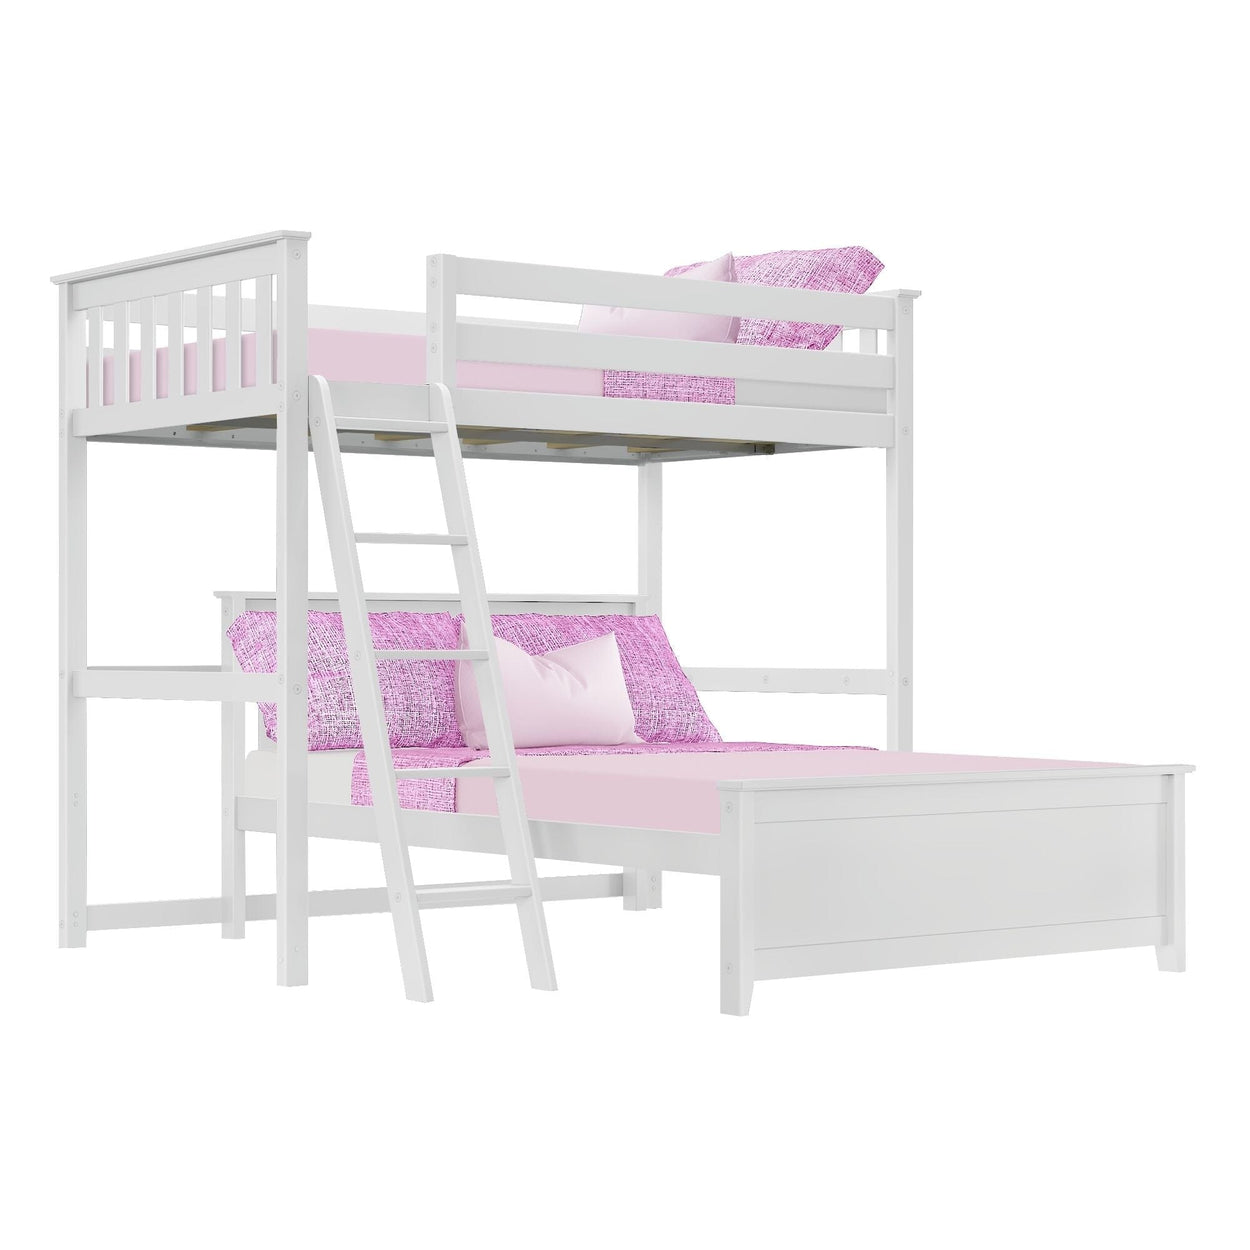 18-812-002 : Bunk Beds L-Shaped Twin over Full Bunk Bed, White